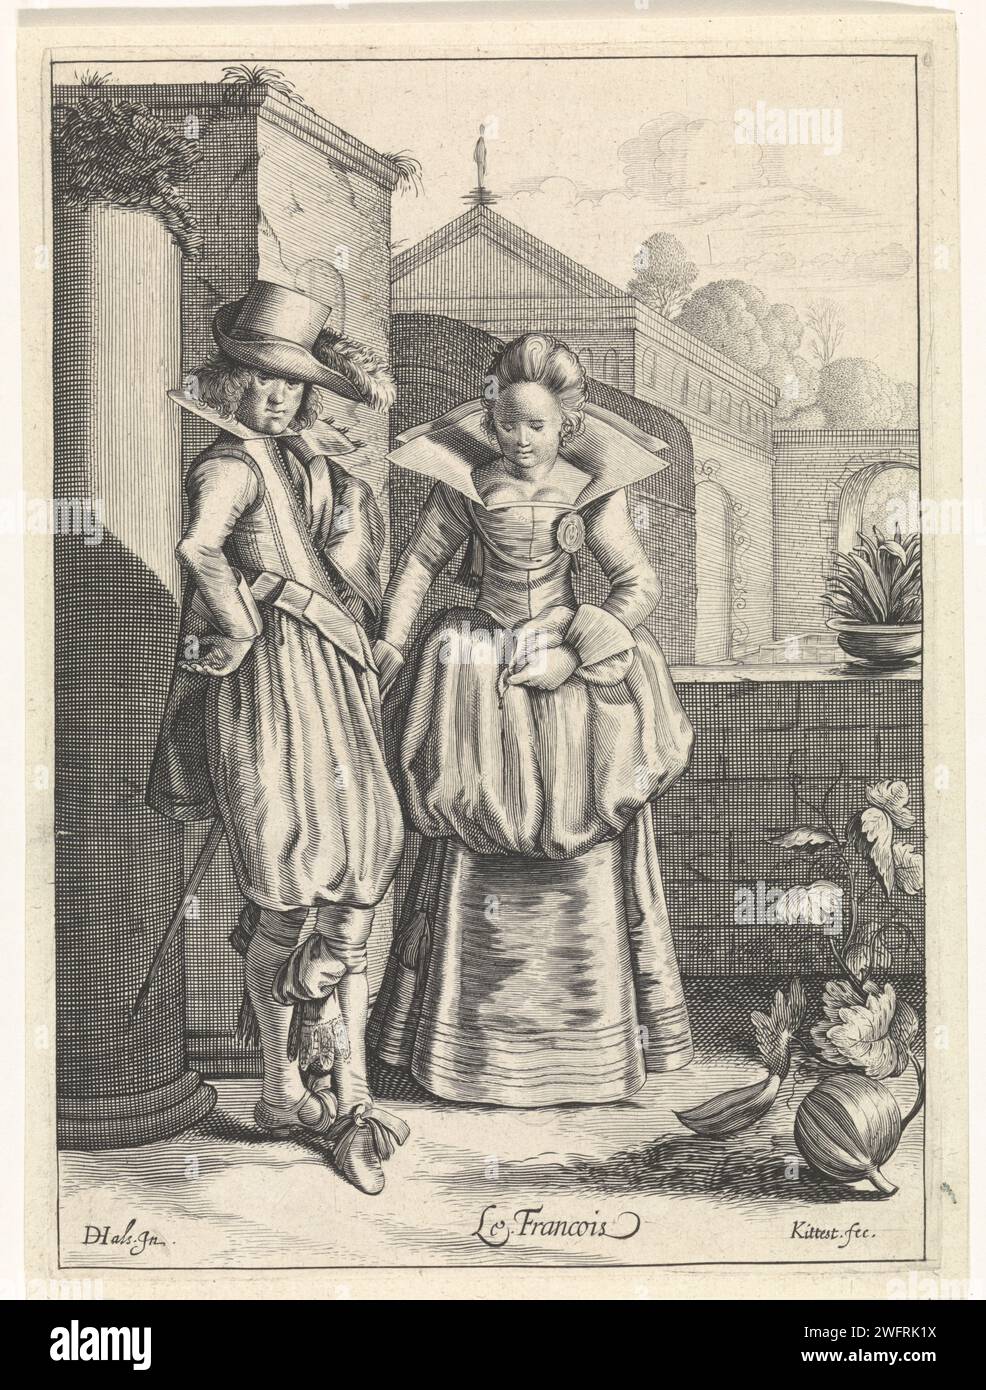 Elegant pair in French clothing, Cornelis van Kittensteyn, After Dirck Hals, 1610 - 1638 print On a landing in front of a castle is an elegantly dressed pair in French fashion of approx. 1620. In front of them is a pumpkin plant with a pumpkin. The print is part of a series with six prints about costumes in Europe. Netherlands paper engraving clothes, costume (+ men's clothes). clothes, costume (+ women's clothes). Europeans (with NAME) (+ costume). handkerchief. plants and herbs Stock Photo